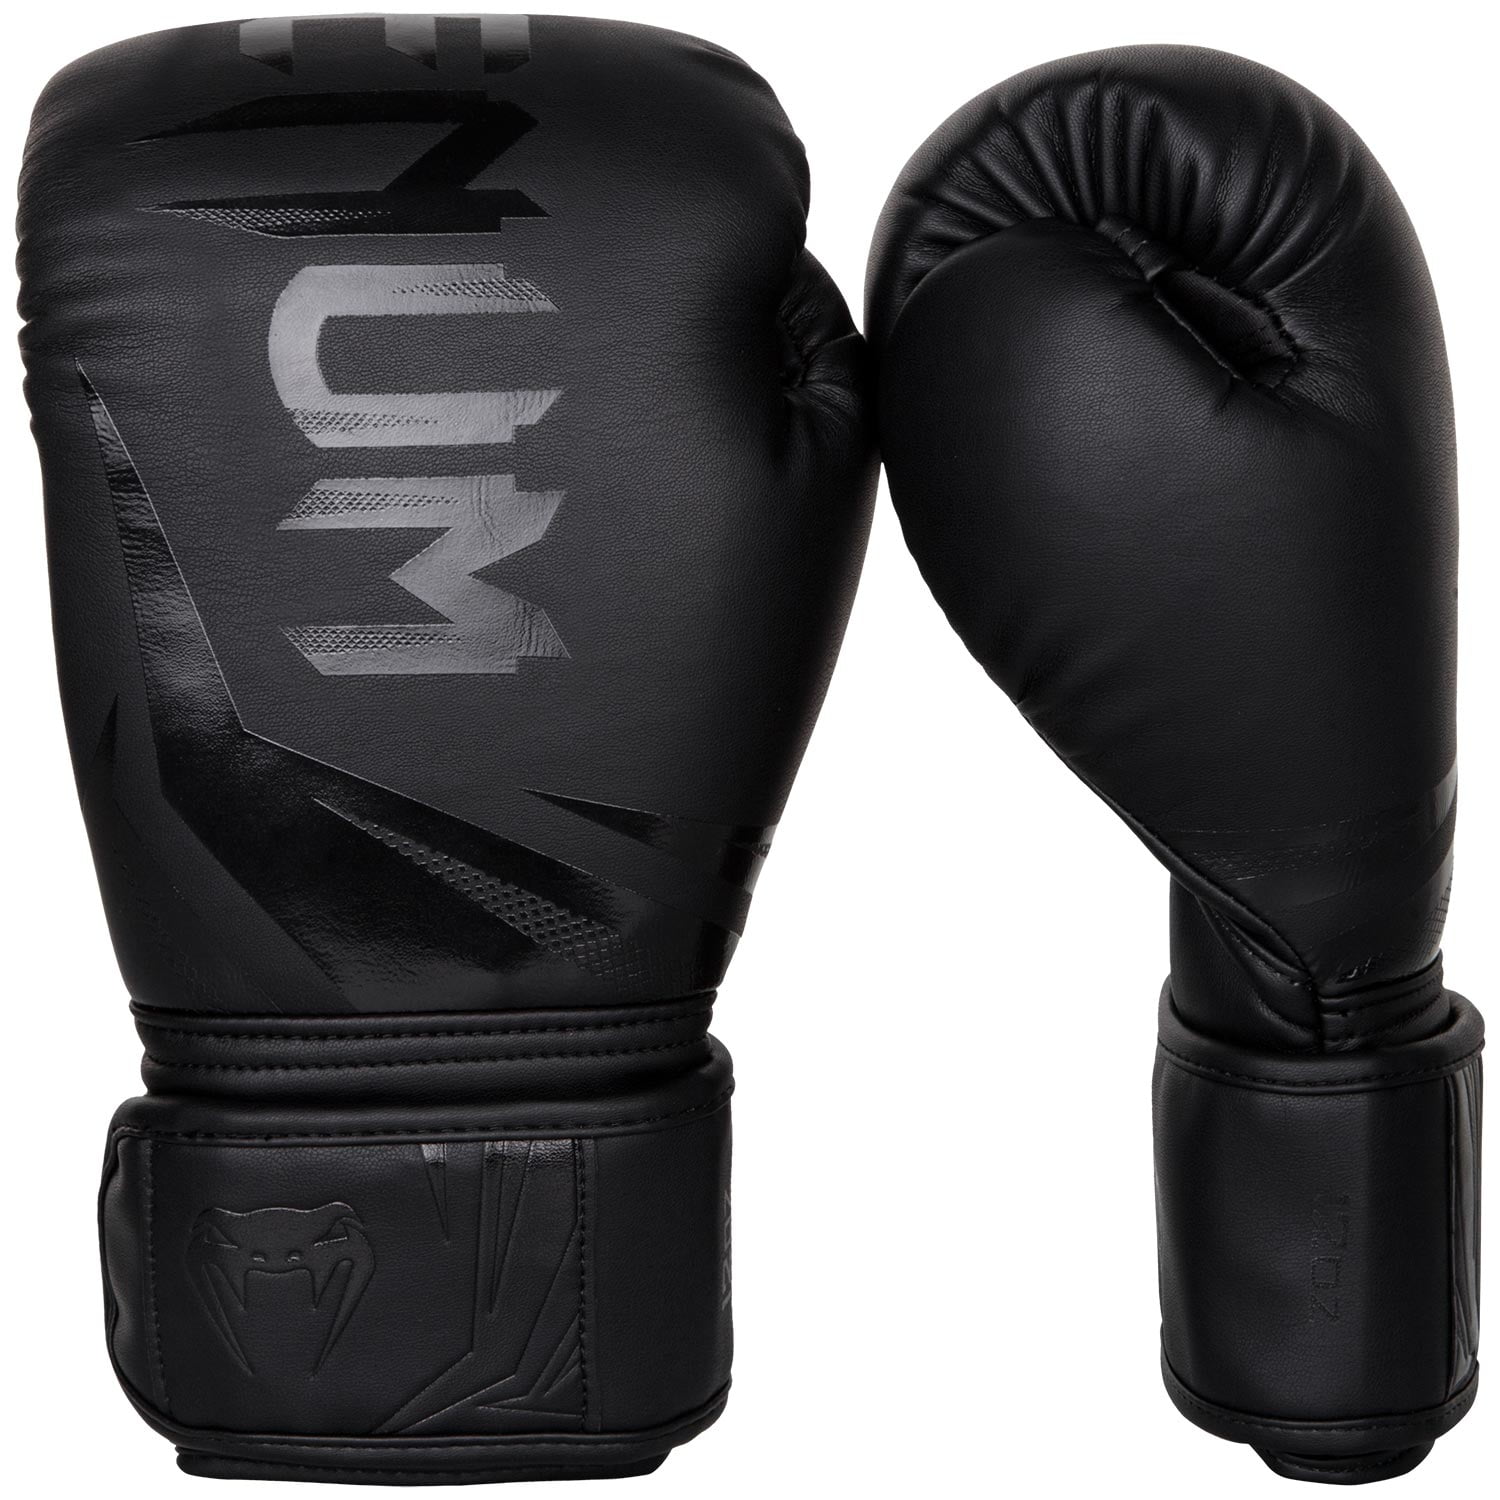 NAPPA LEATHER VENUM GIANT 3.0 BOXING GLOVES BLACK/SILVER 